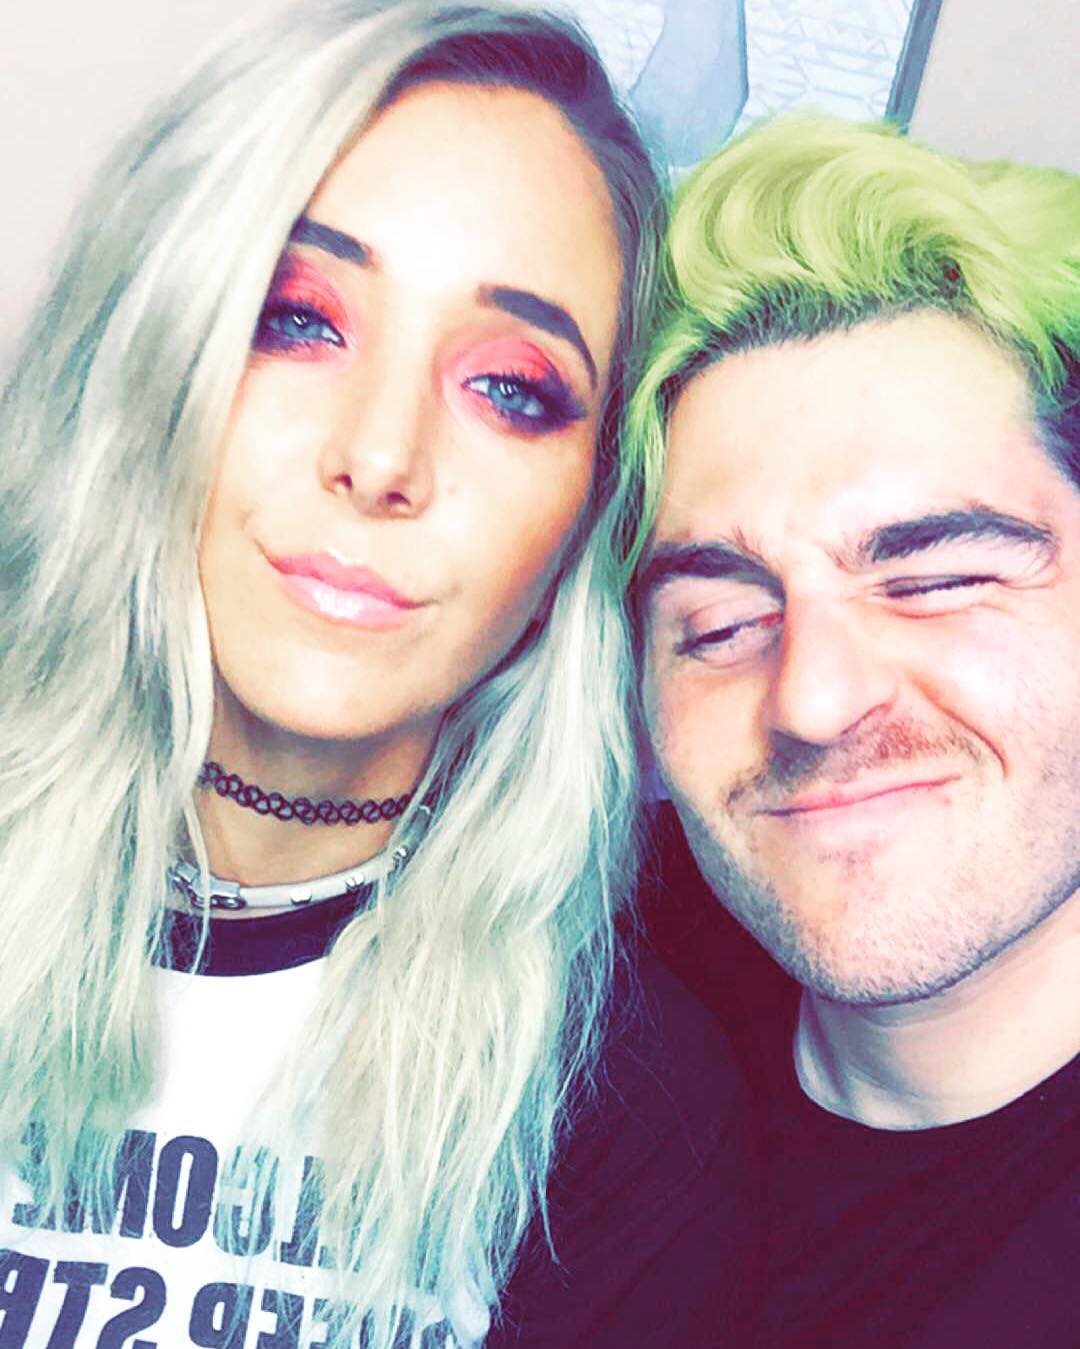 Jenna Marbles and Julien Solomita